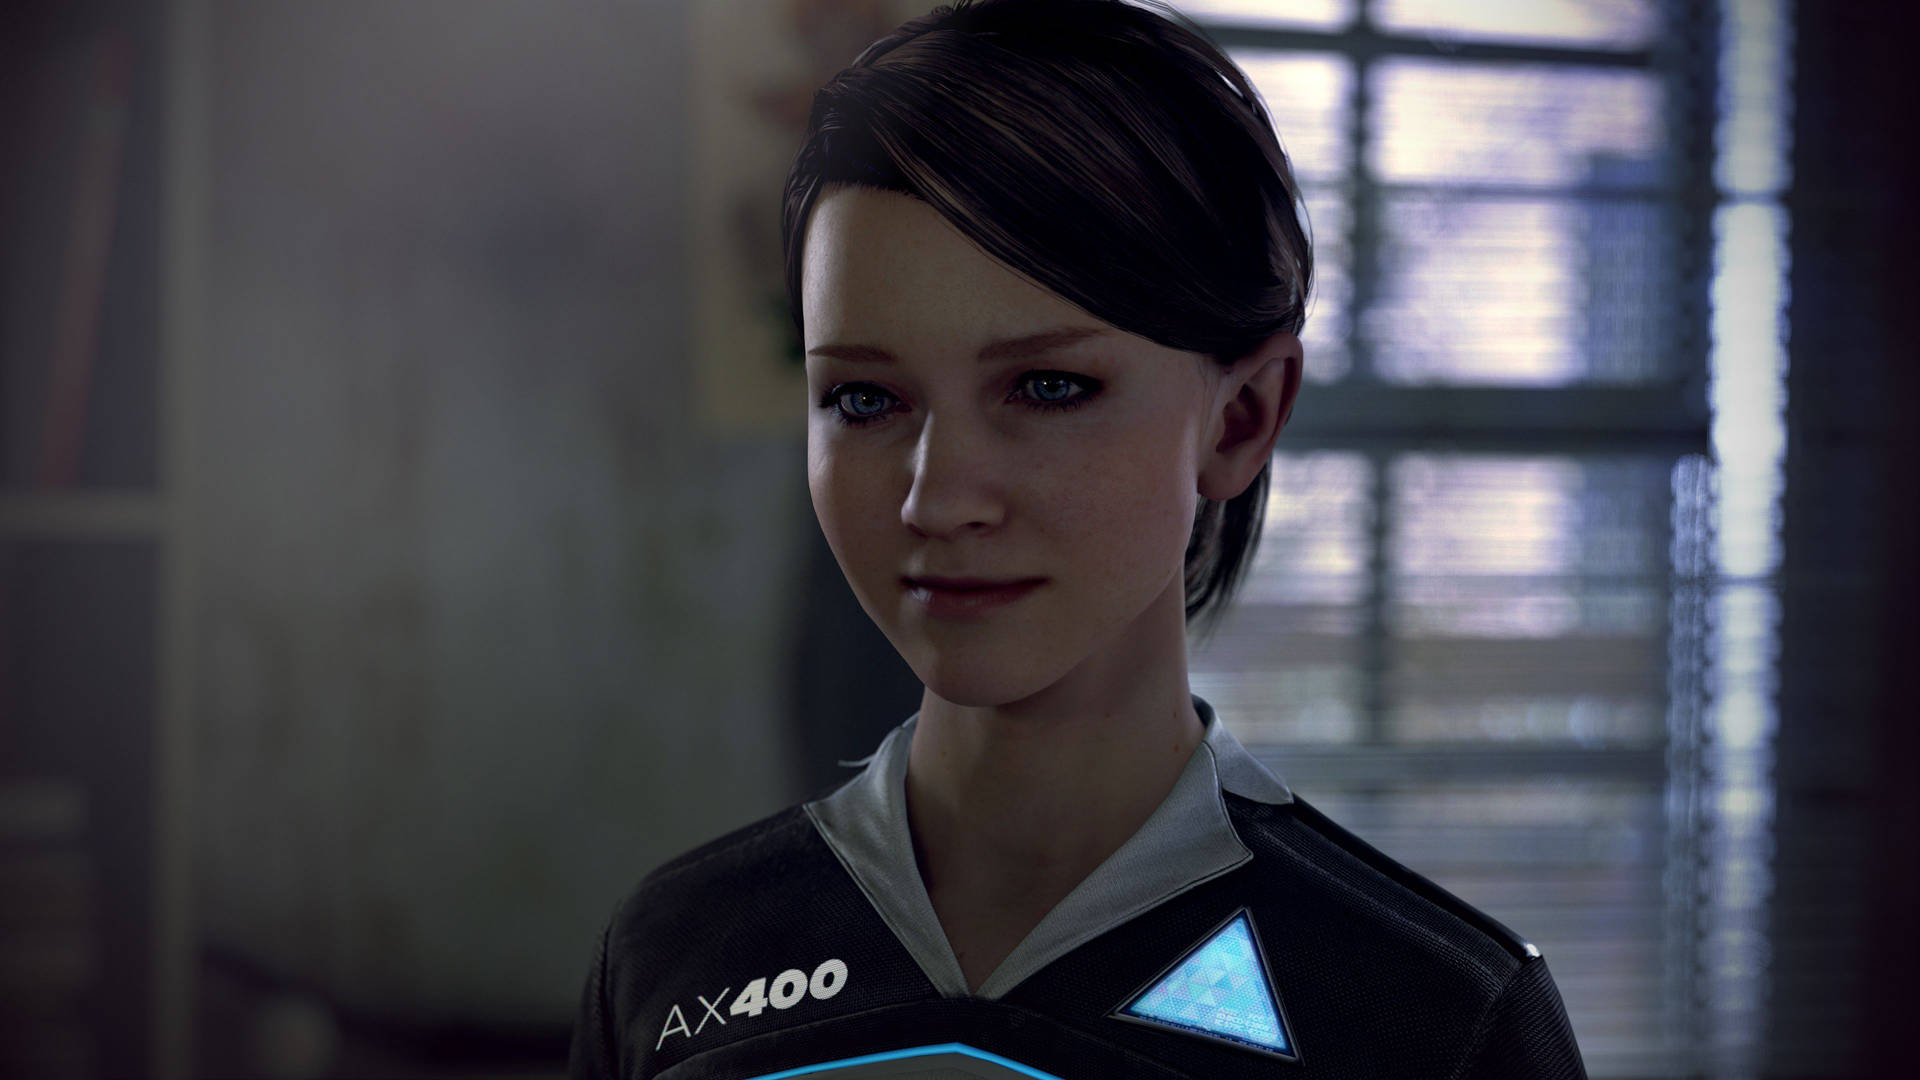 3840X2160 Detroit Become Human Wallpaper and Background